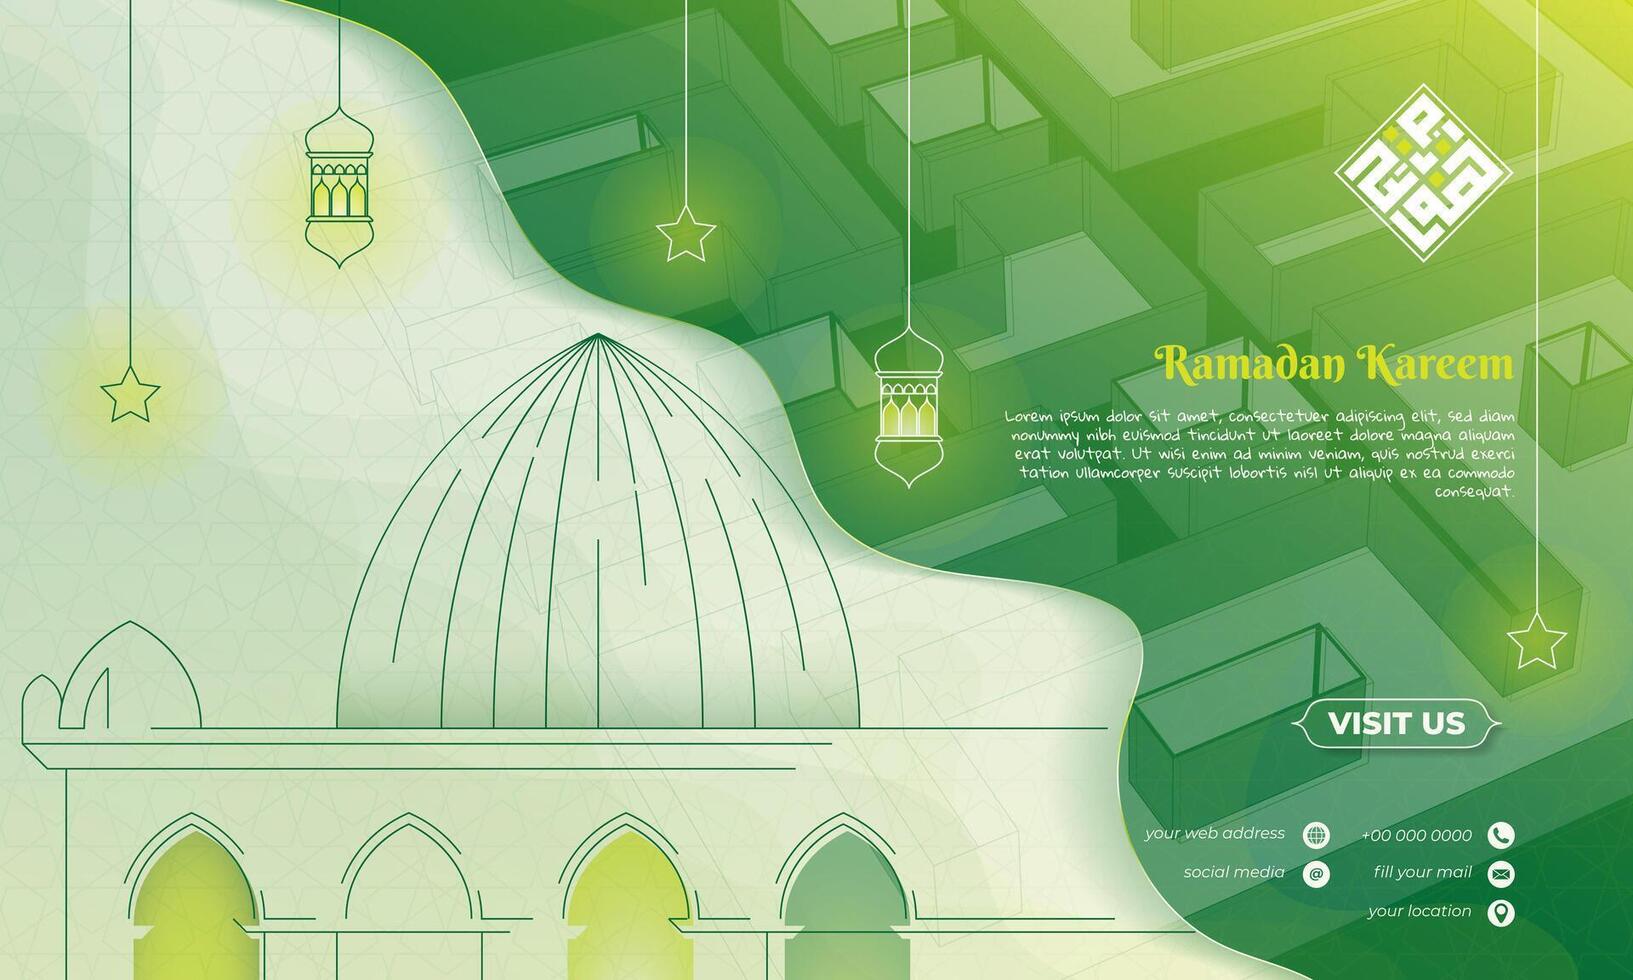 Background in green design with line art of mosque, lantern, and star for ramadan kareem. Islamic background with green, yellow, white design. Arabic text mean is ramadan kareem. vector